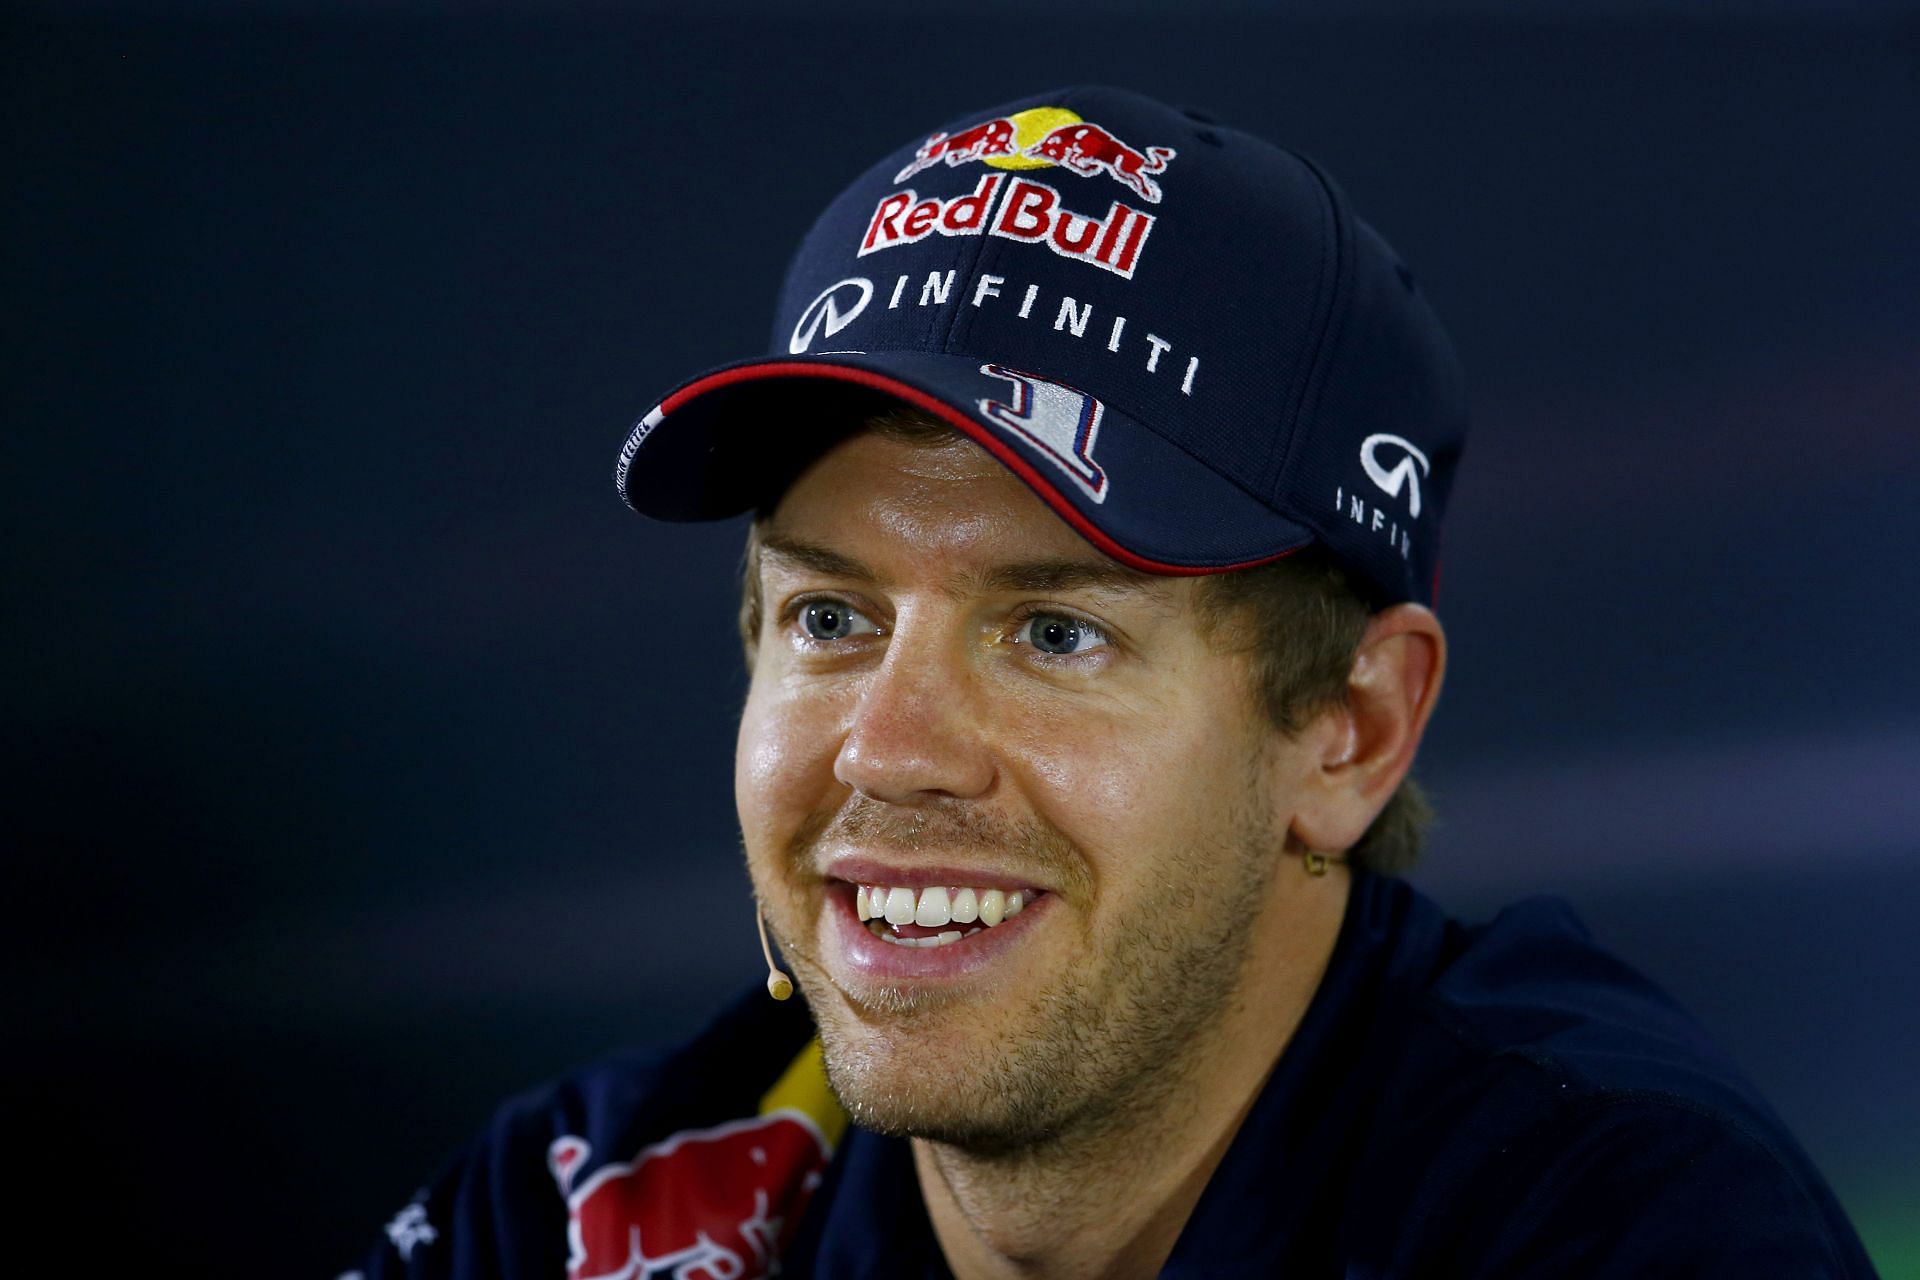 Sebastian Vettel became a four time F1 world champion with Red Bull